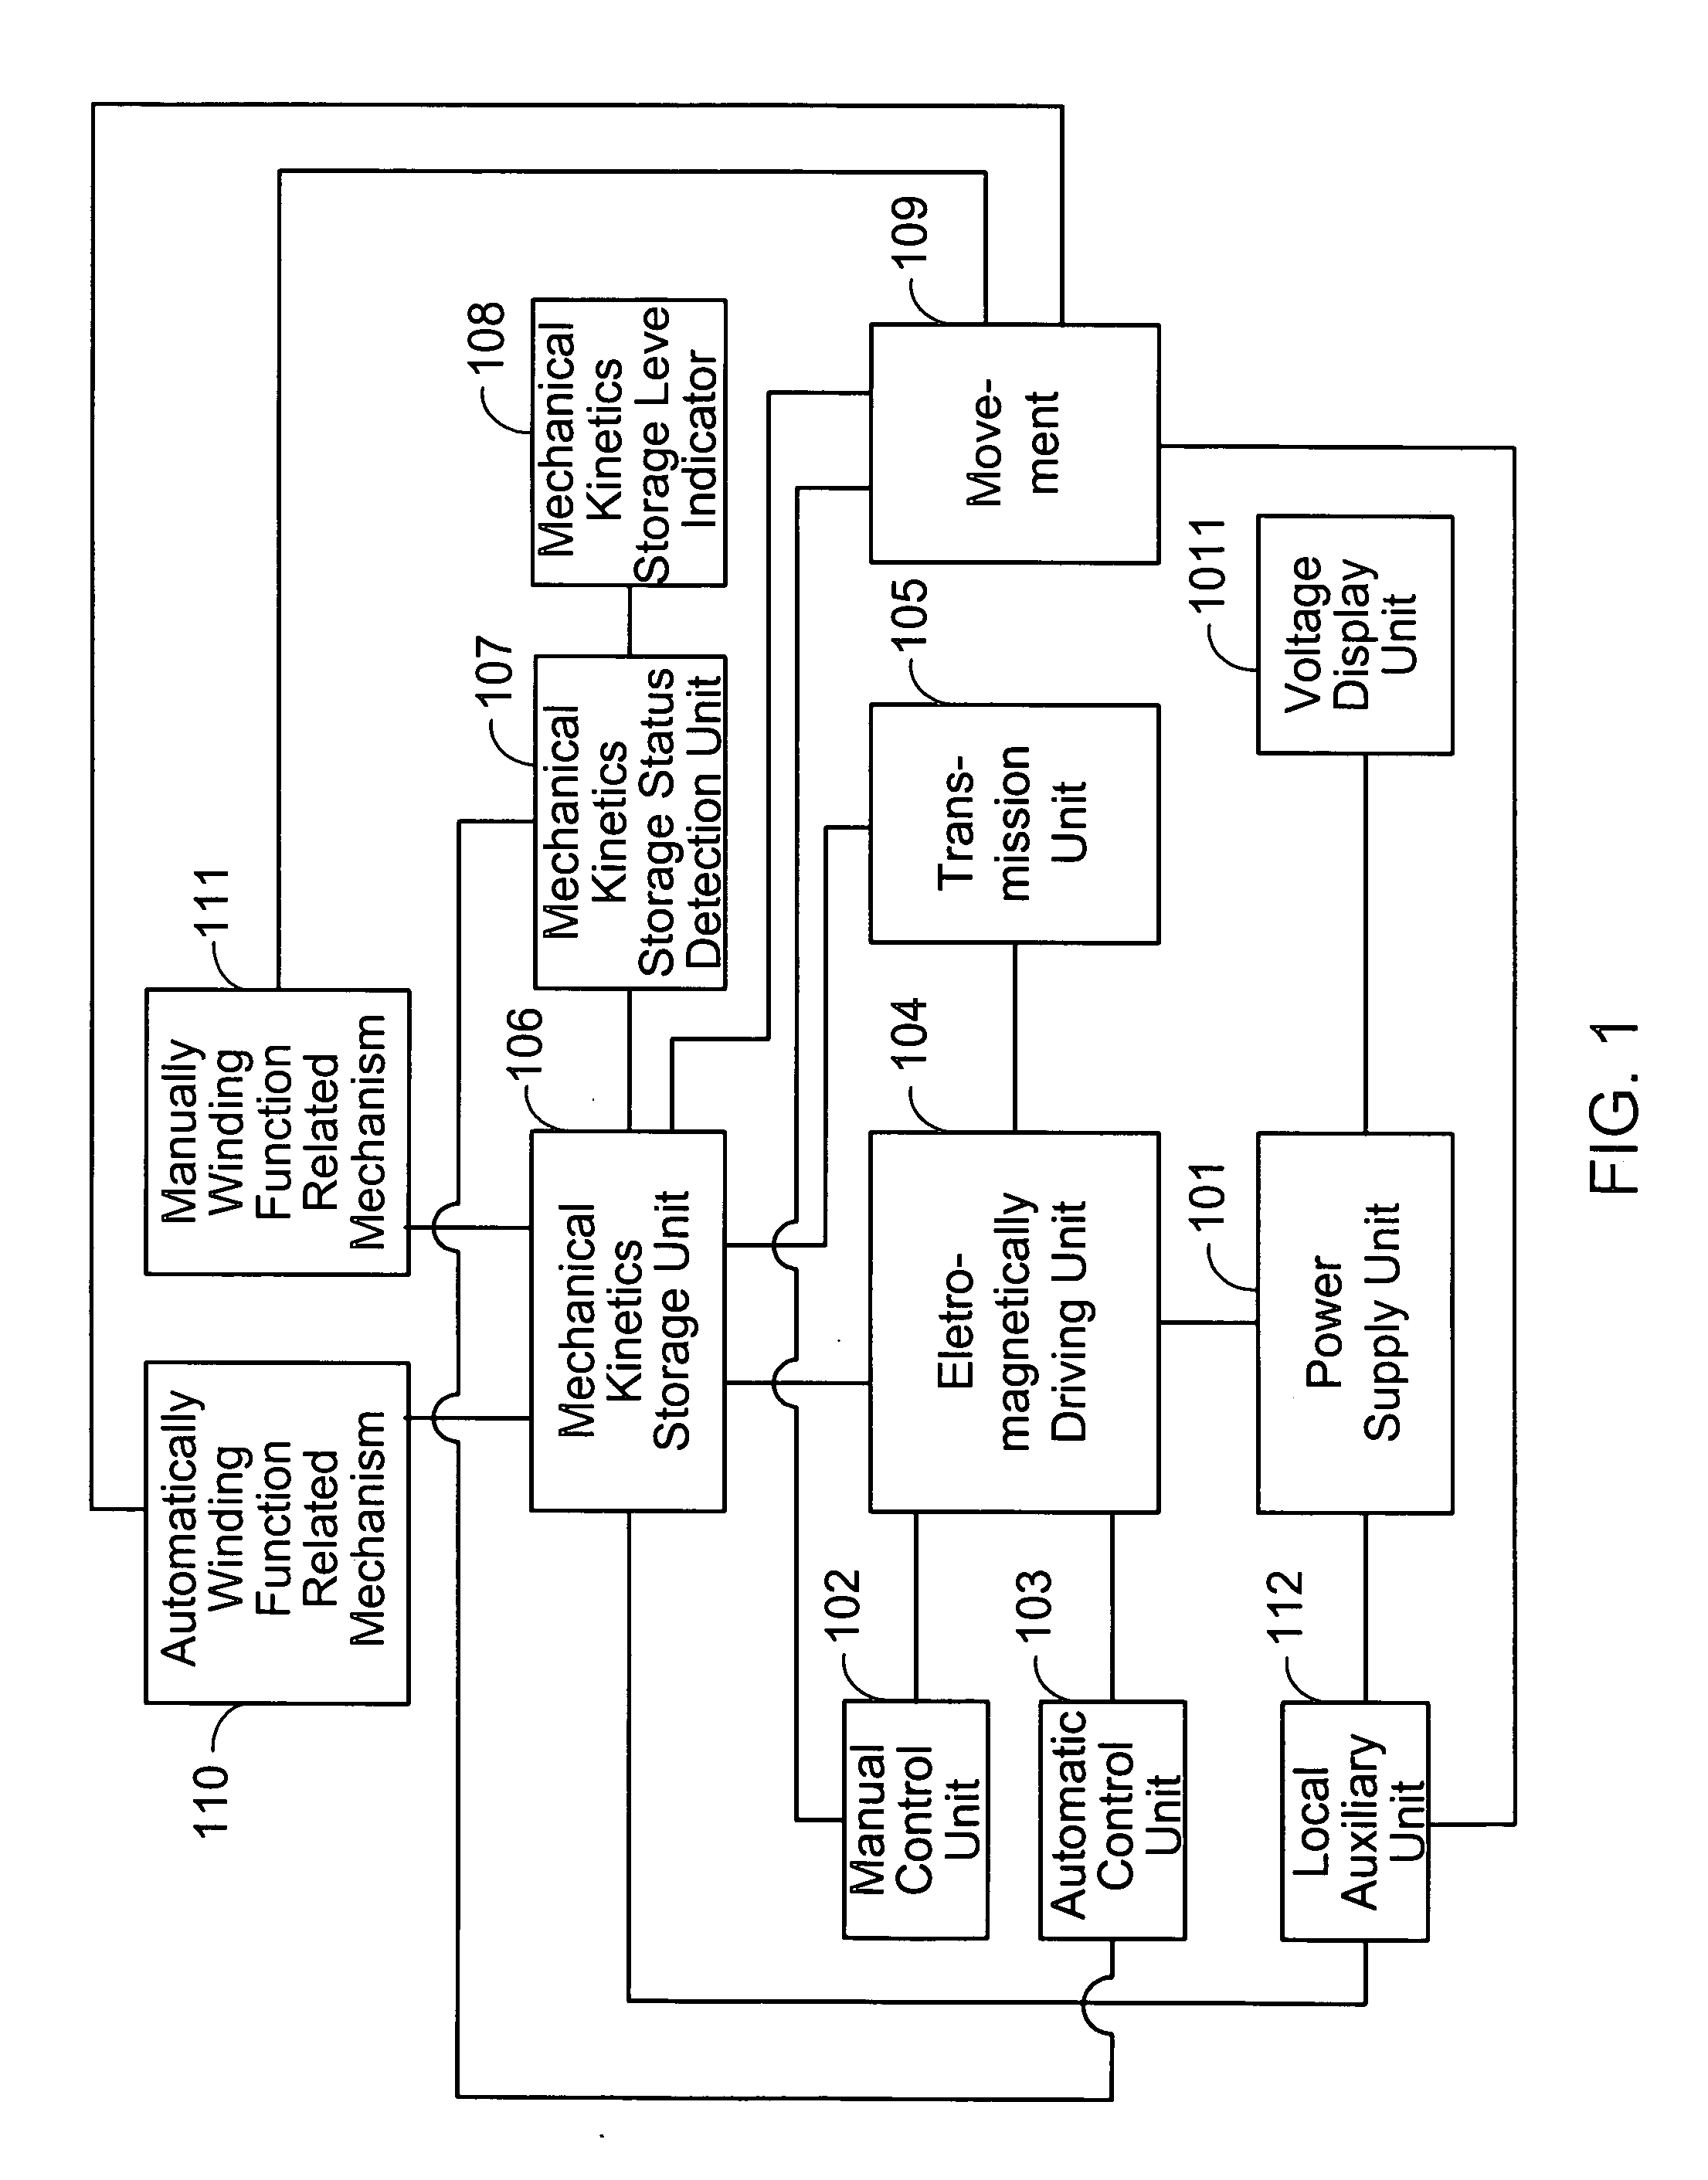 Hybrid power timing device